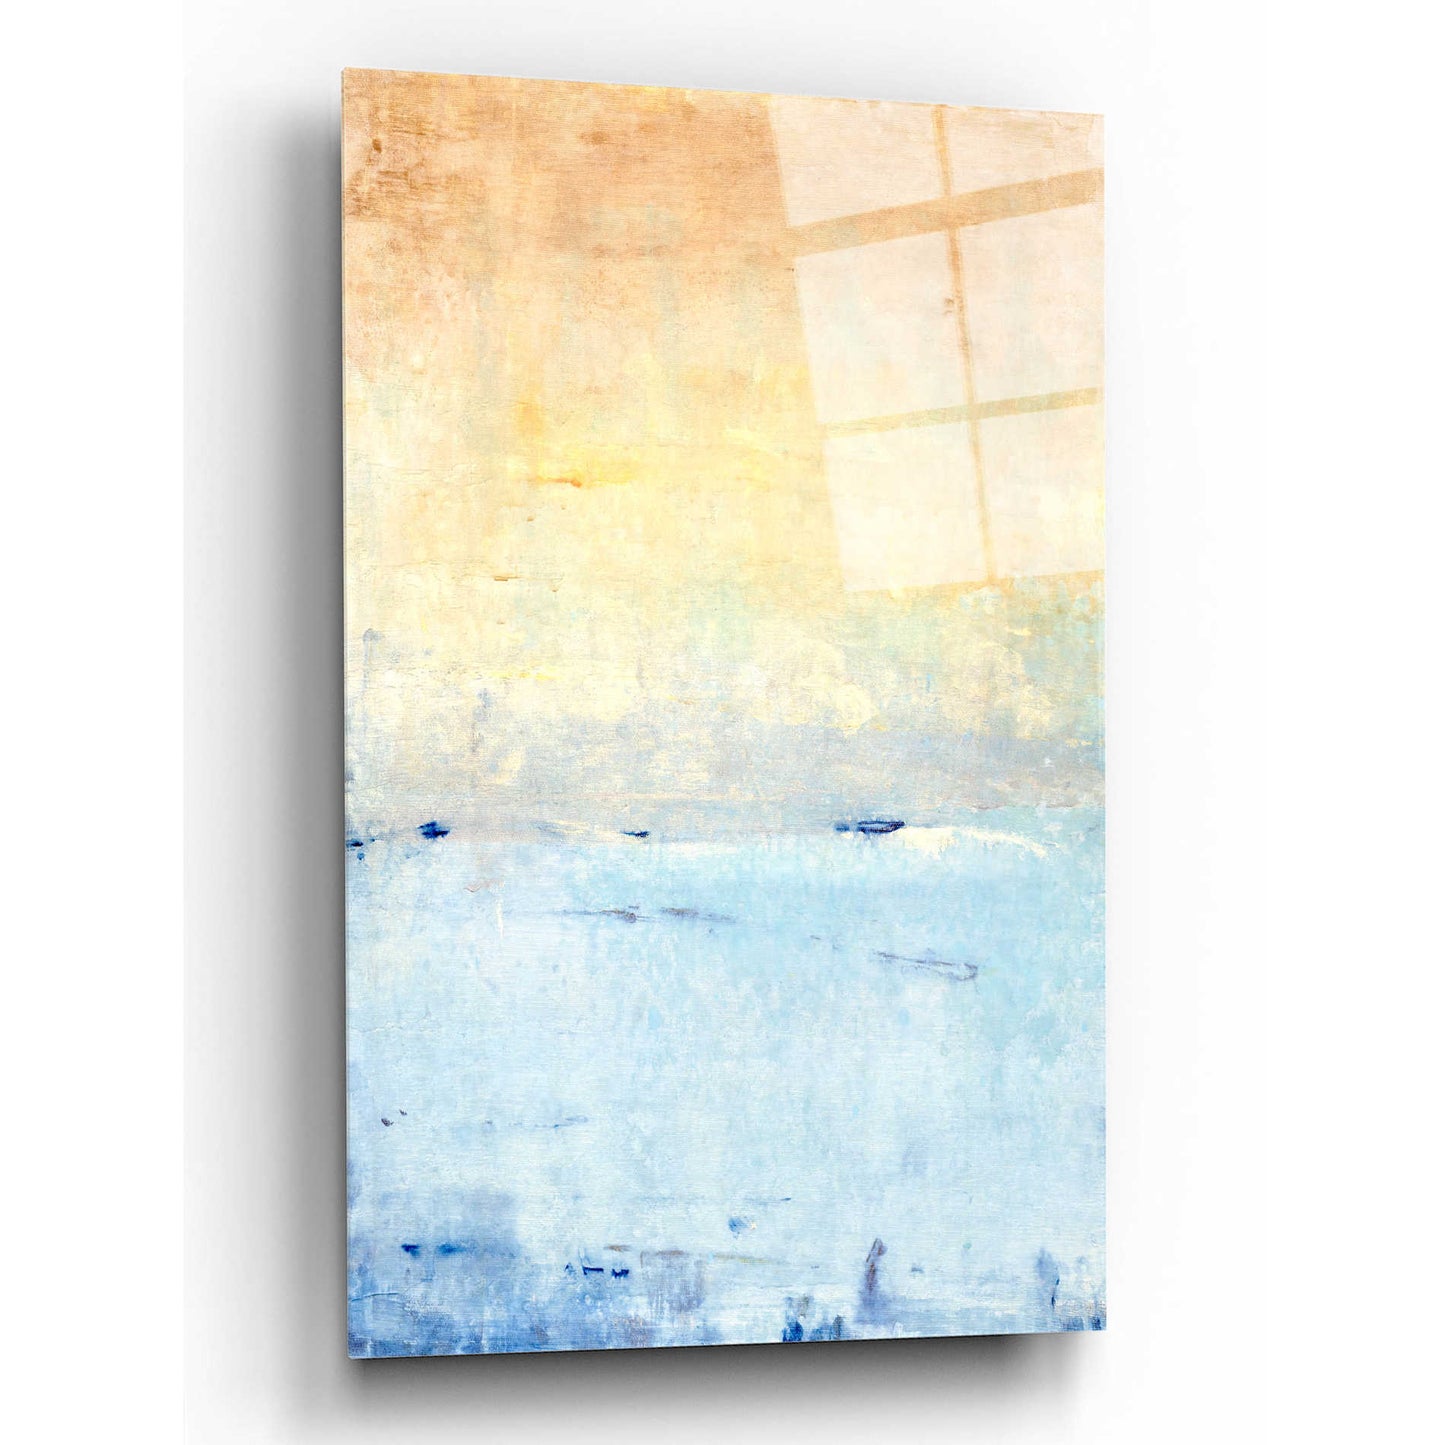 Epic Art 'Inlet at Sunrise II' by Tim O'Toole, Acrylic Glass Wall Art,16x24